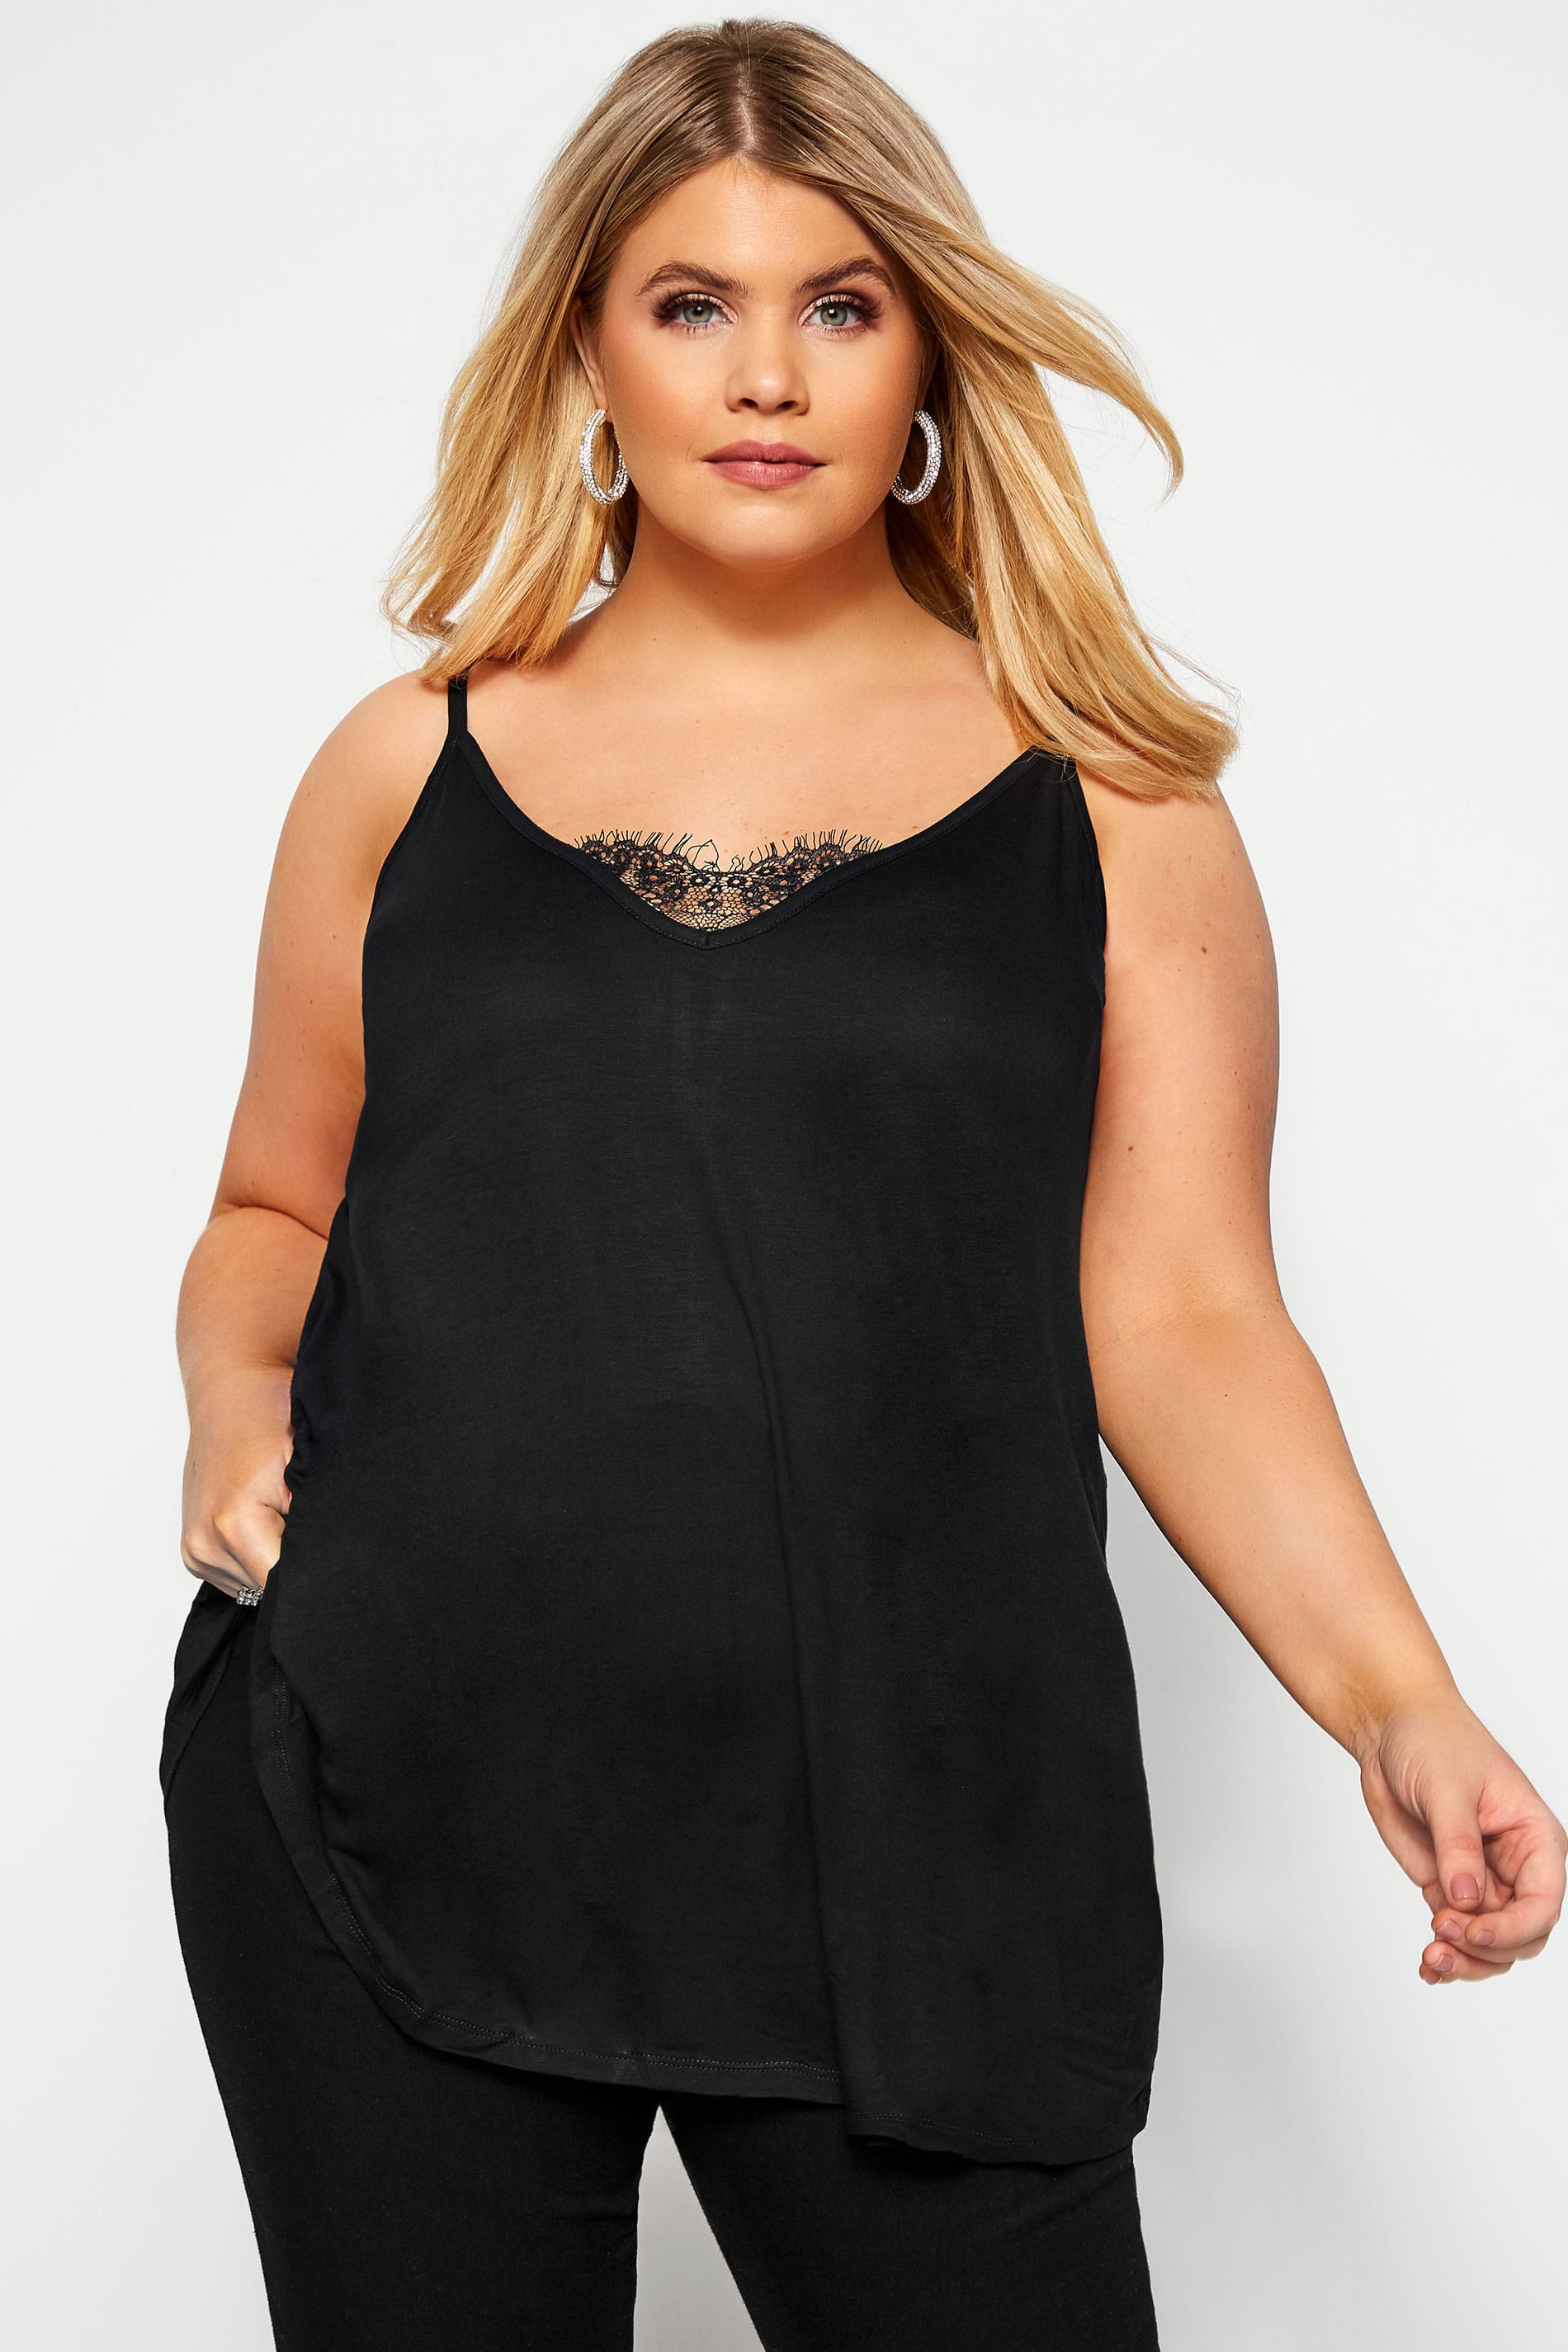 YOURS LONDON Black Eyelash Lace Cami Top, Plus size 16 to 32 | Yours ...